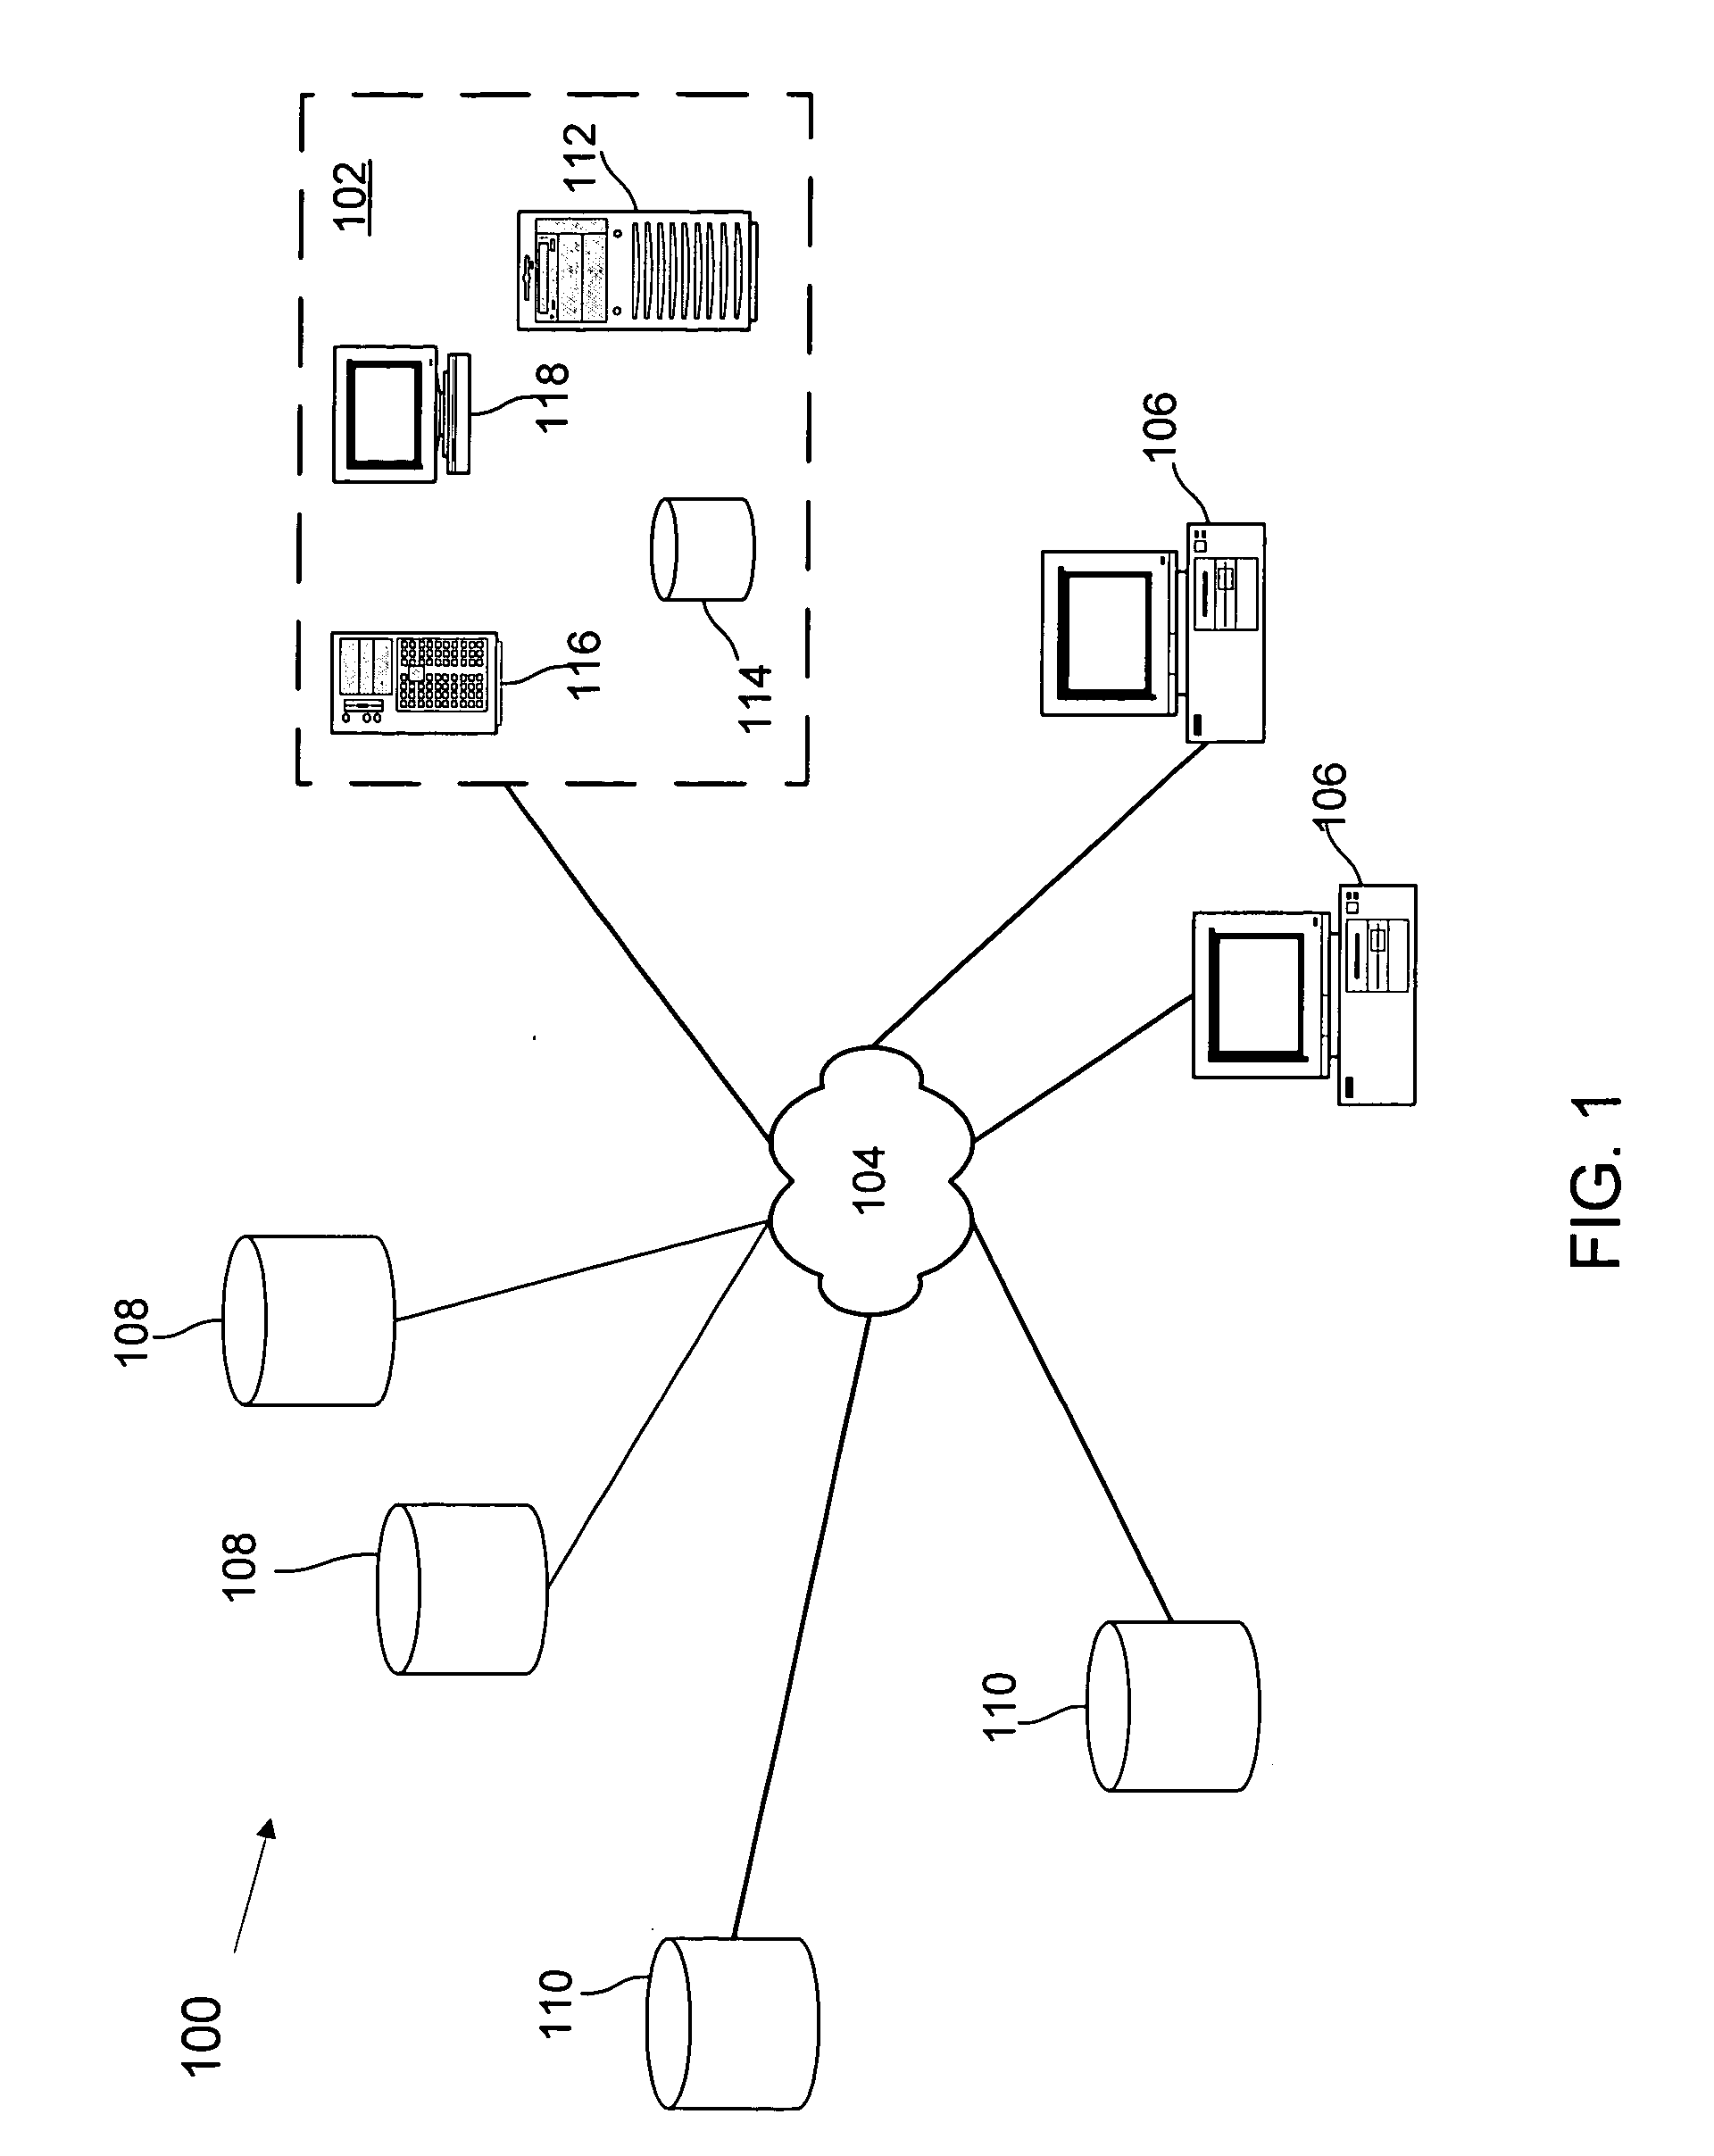 Genealogical investigation and documentation systems and methods